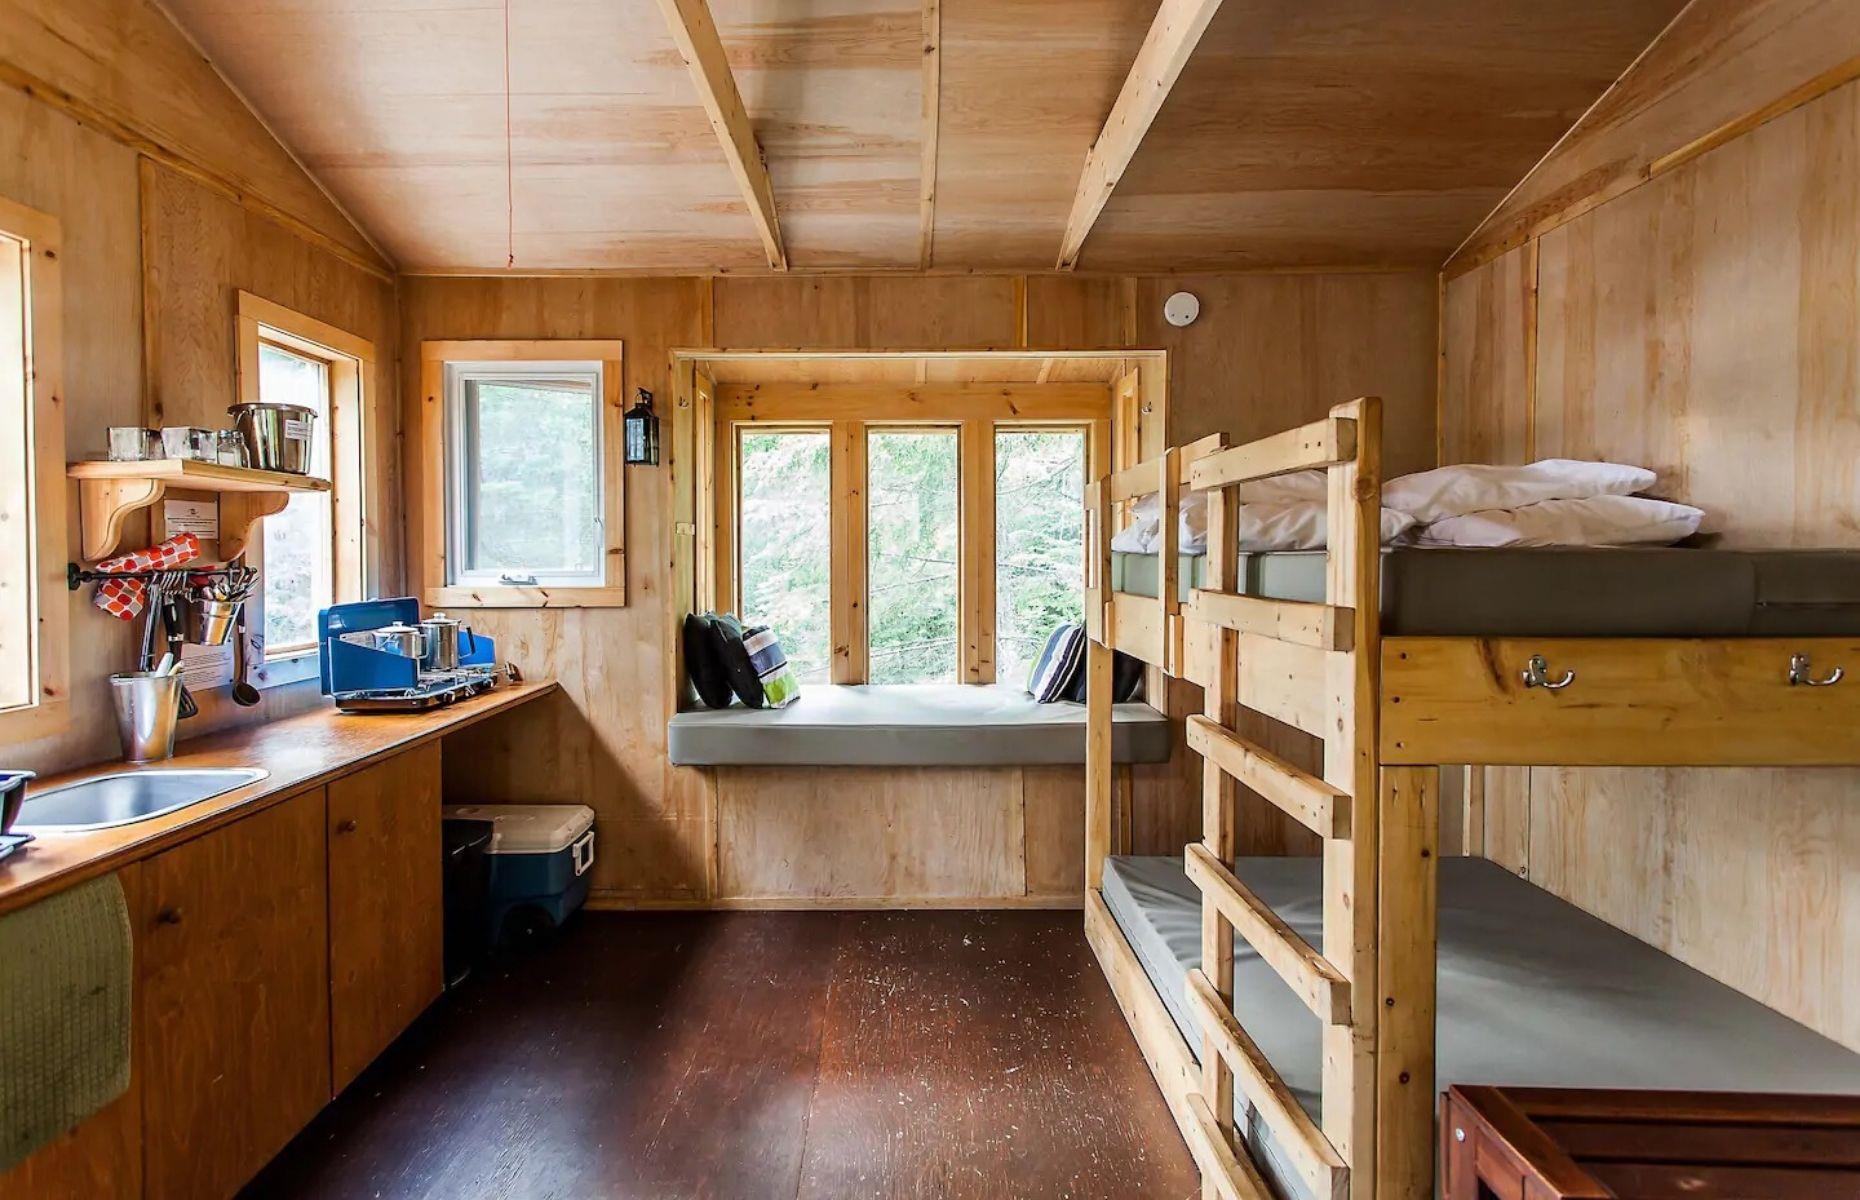 <p>Suitable for up to six people at any one time, this cozy cabin offers just one small room, yet it features everything a person could possibly need. There's a basic kitchen, comfy bunk beds, and a small seating area and wood-burning stove for post-hike R&R! Plus, thanks to its natural timber palette and minimalist fixtures, this rustic treehouse offers a real taste of off-grid living.</p>